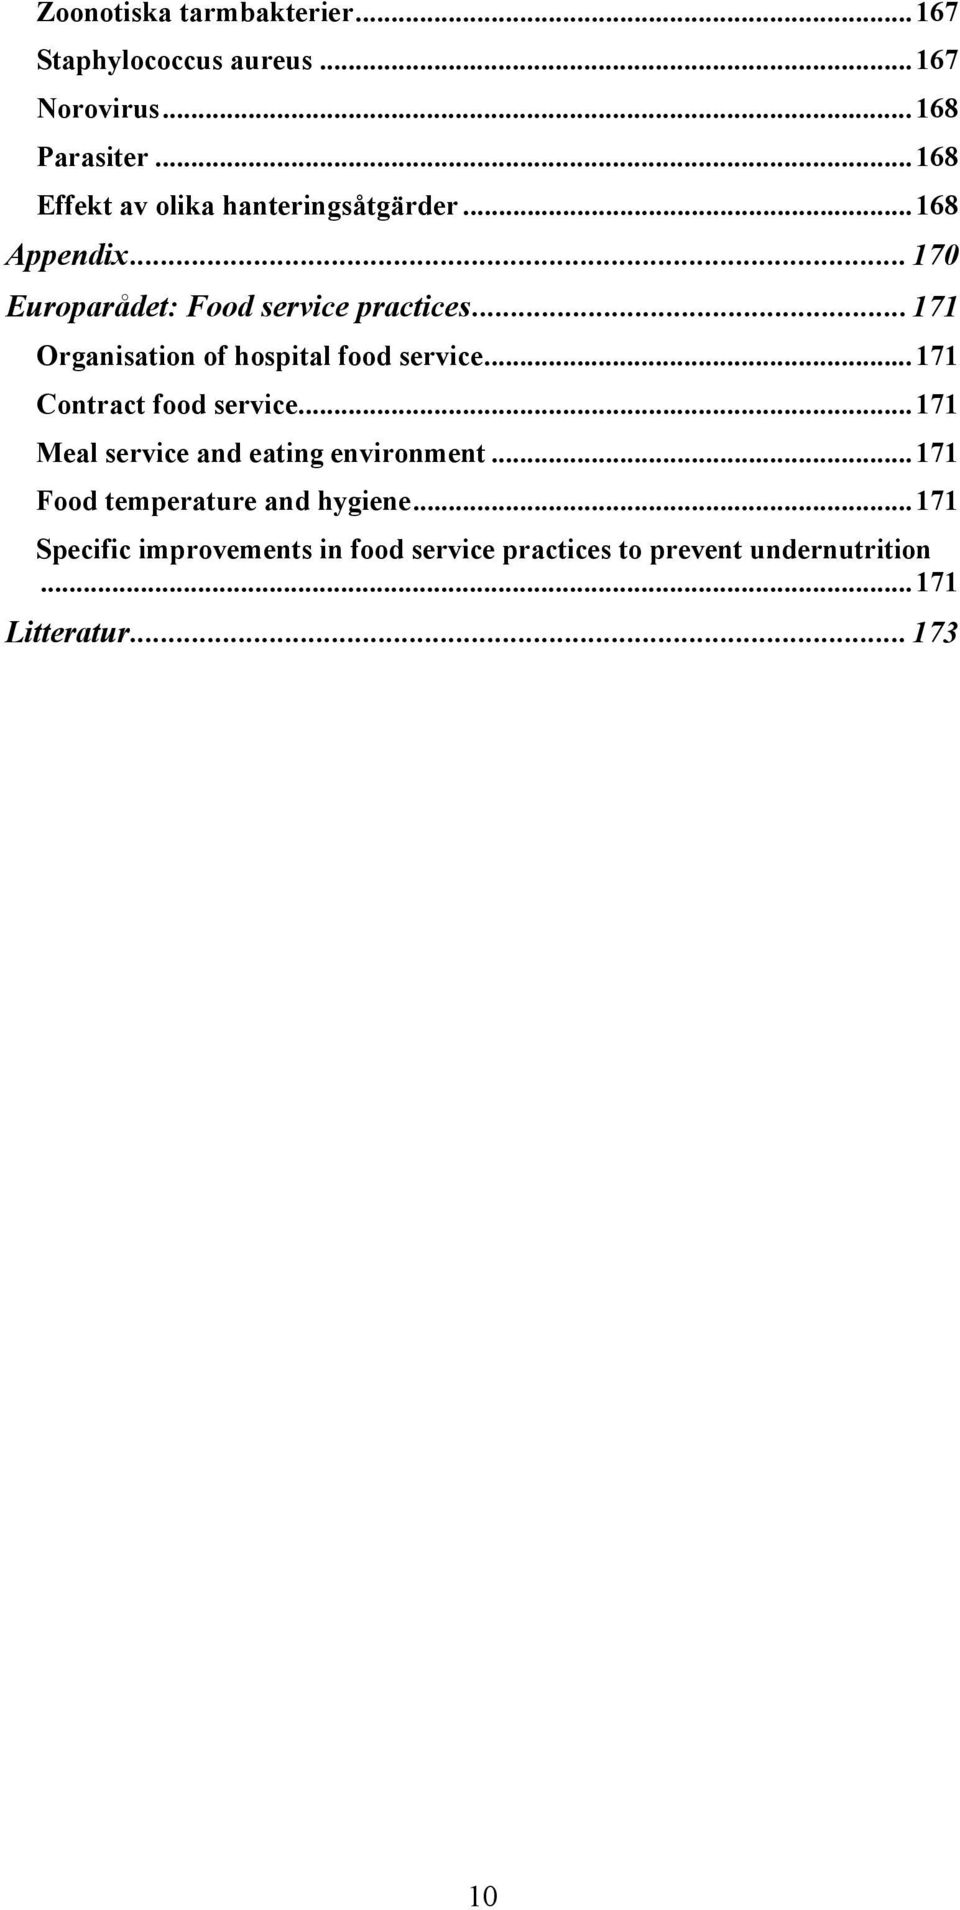 .. 171 Organisation of hospital food service... 171 Contract food service.